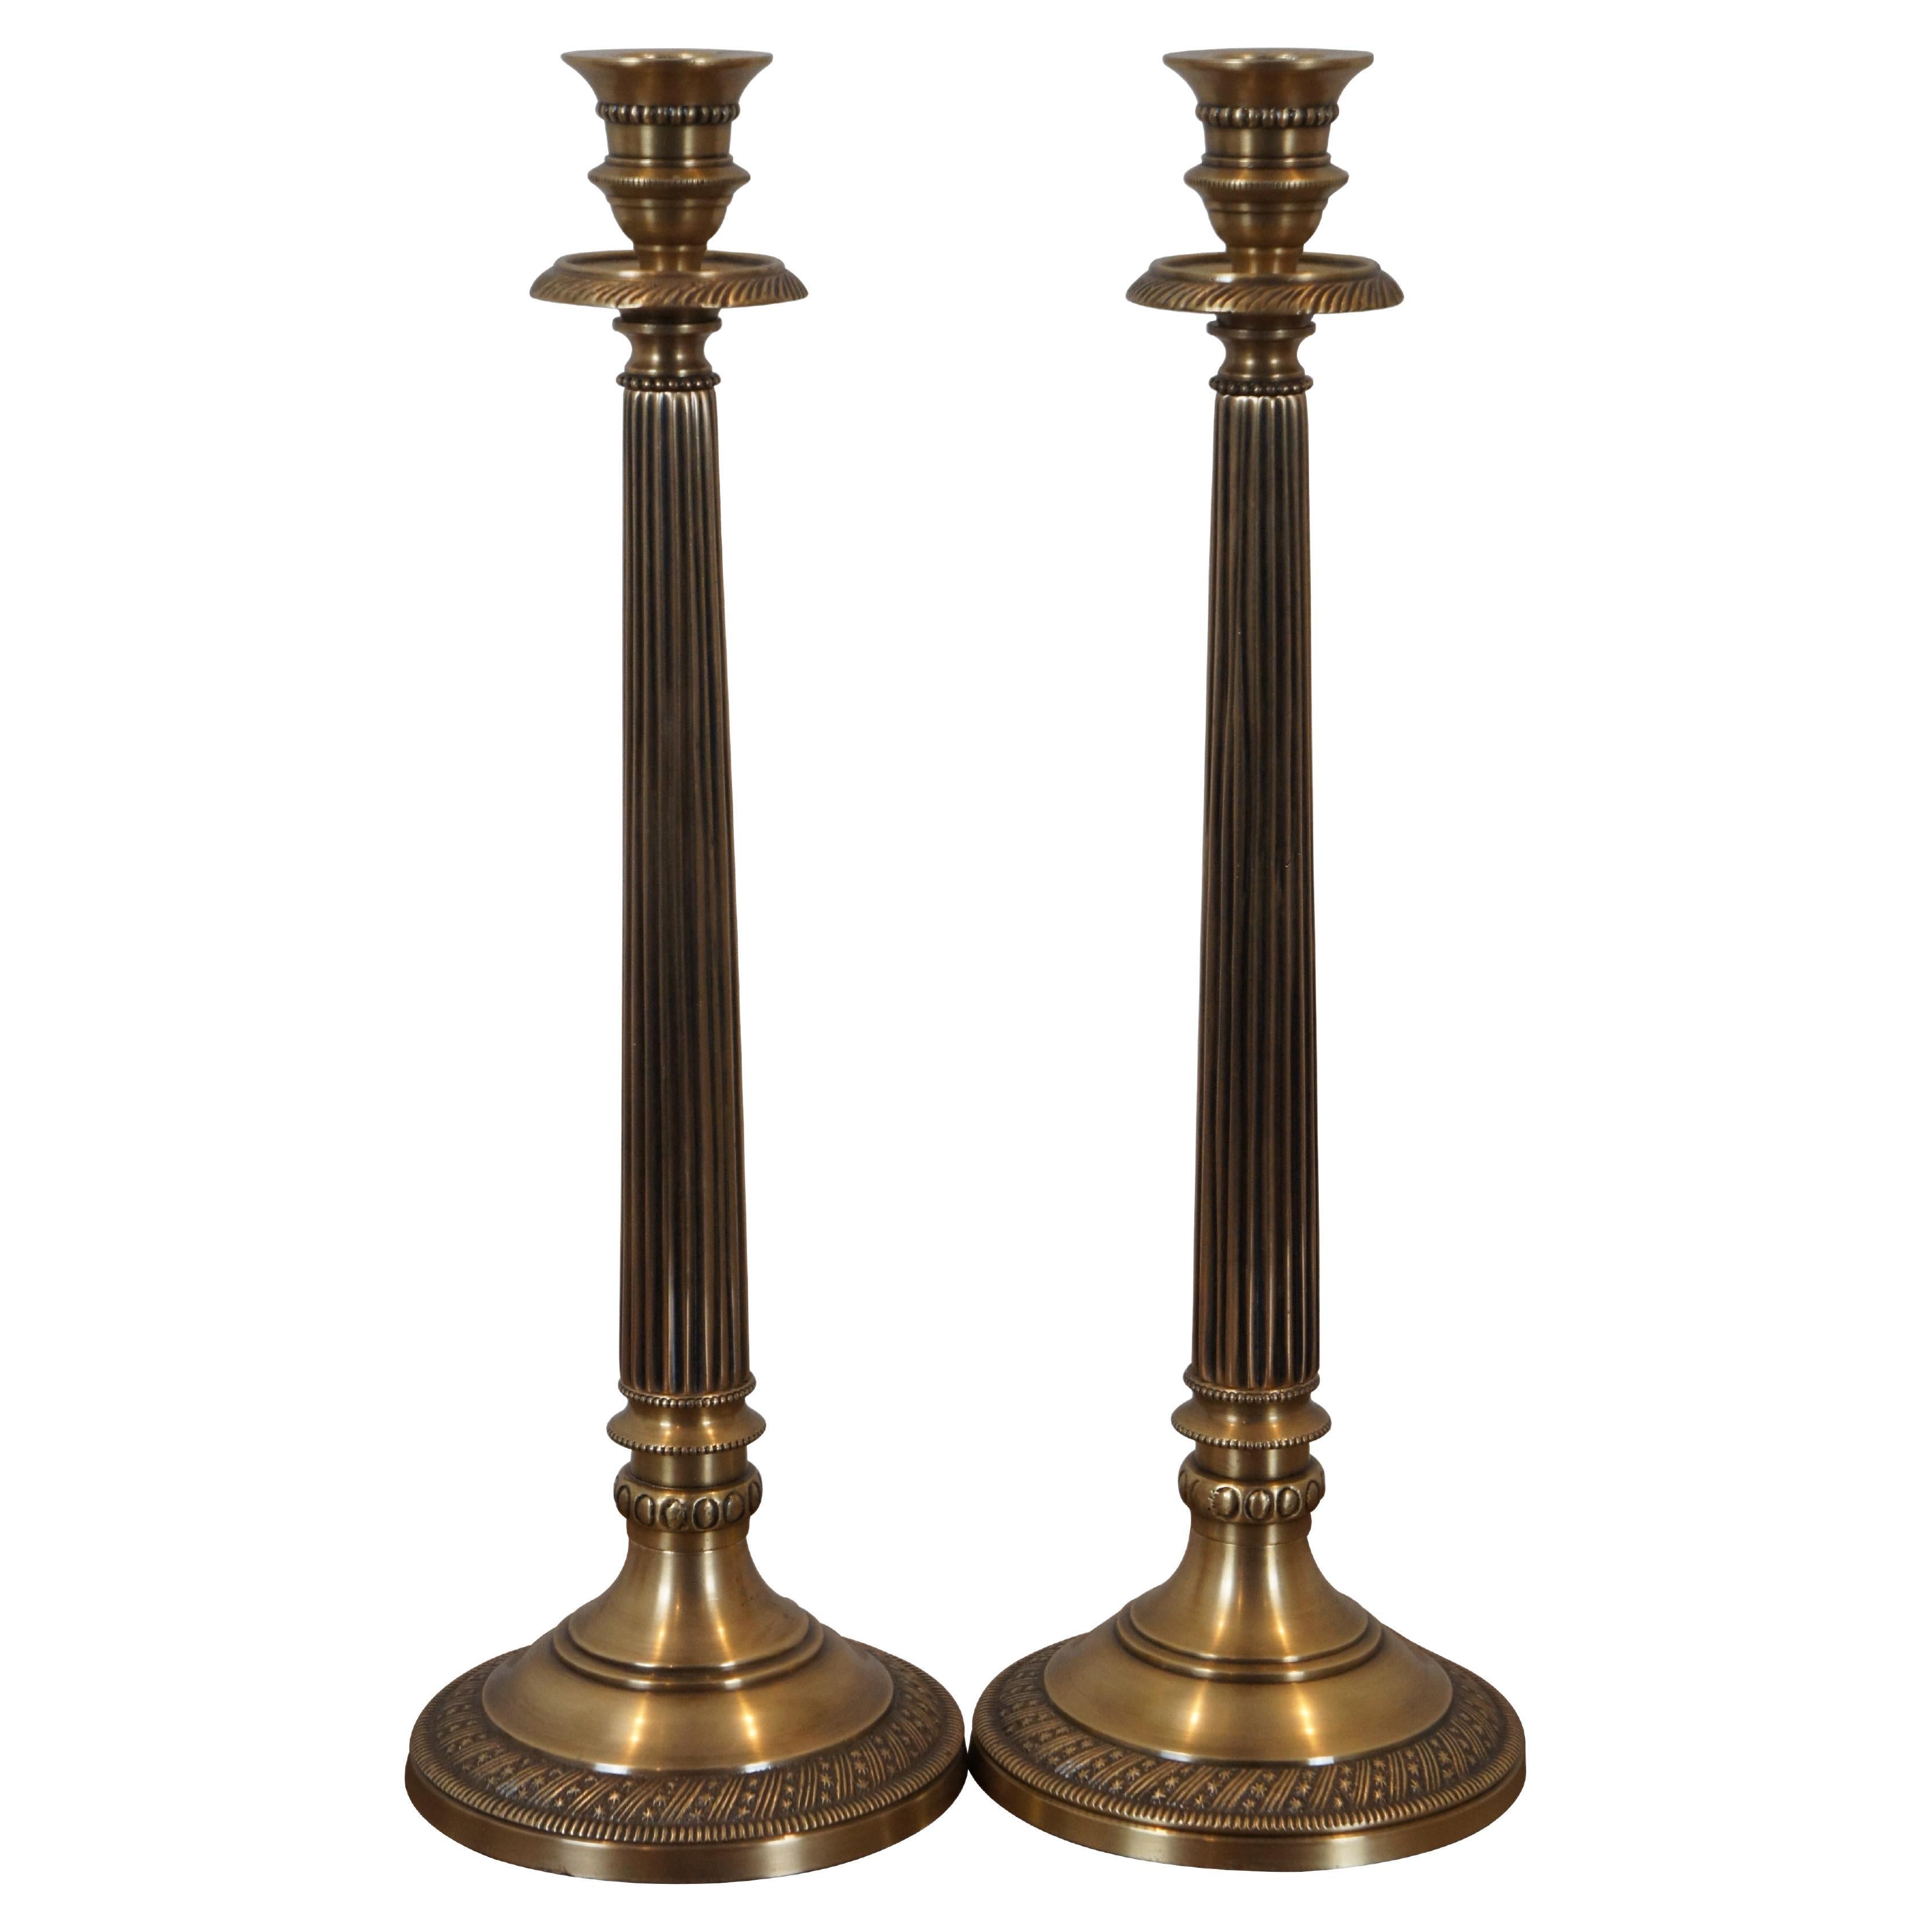 2 Brass Neoclassical Fluted Column Star Band Candlestick Candle Holders 15”